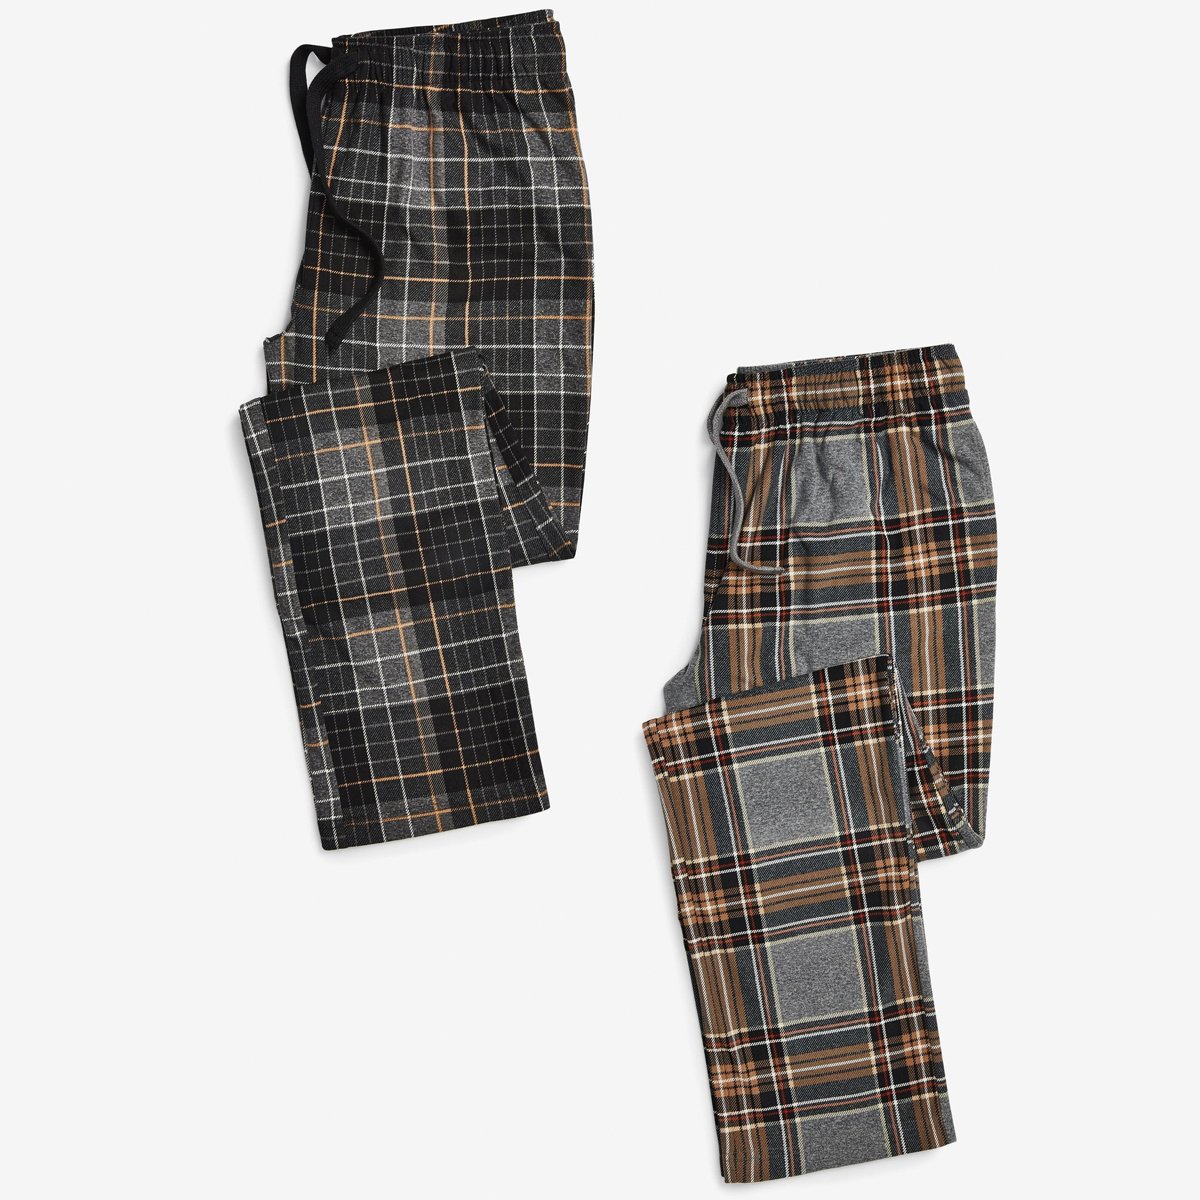 Charcoal Grey/Neutral Check Cosy Pyjama Bottoms 2 Pack, £30